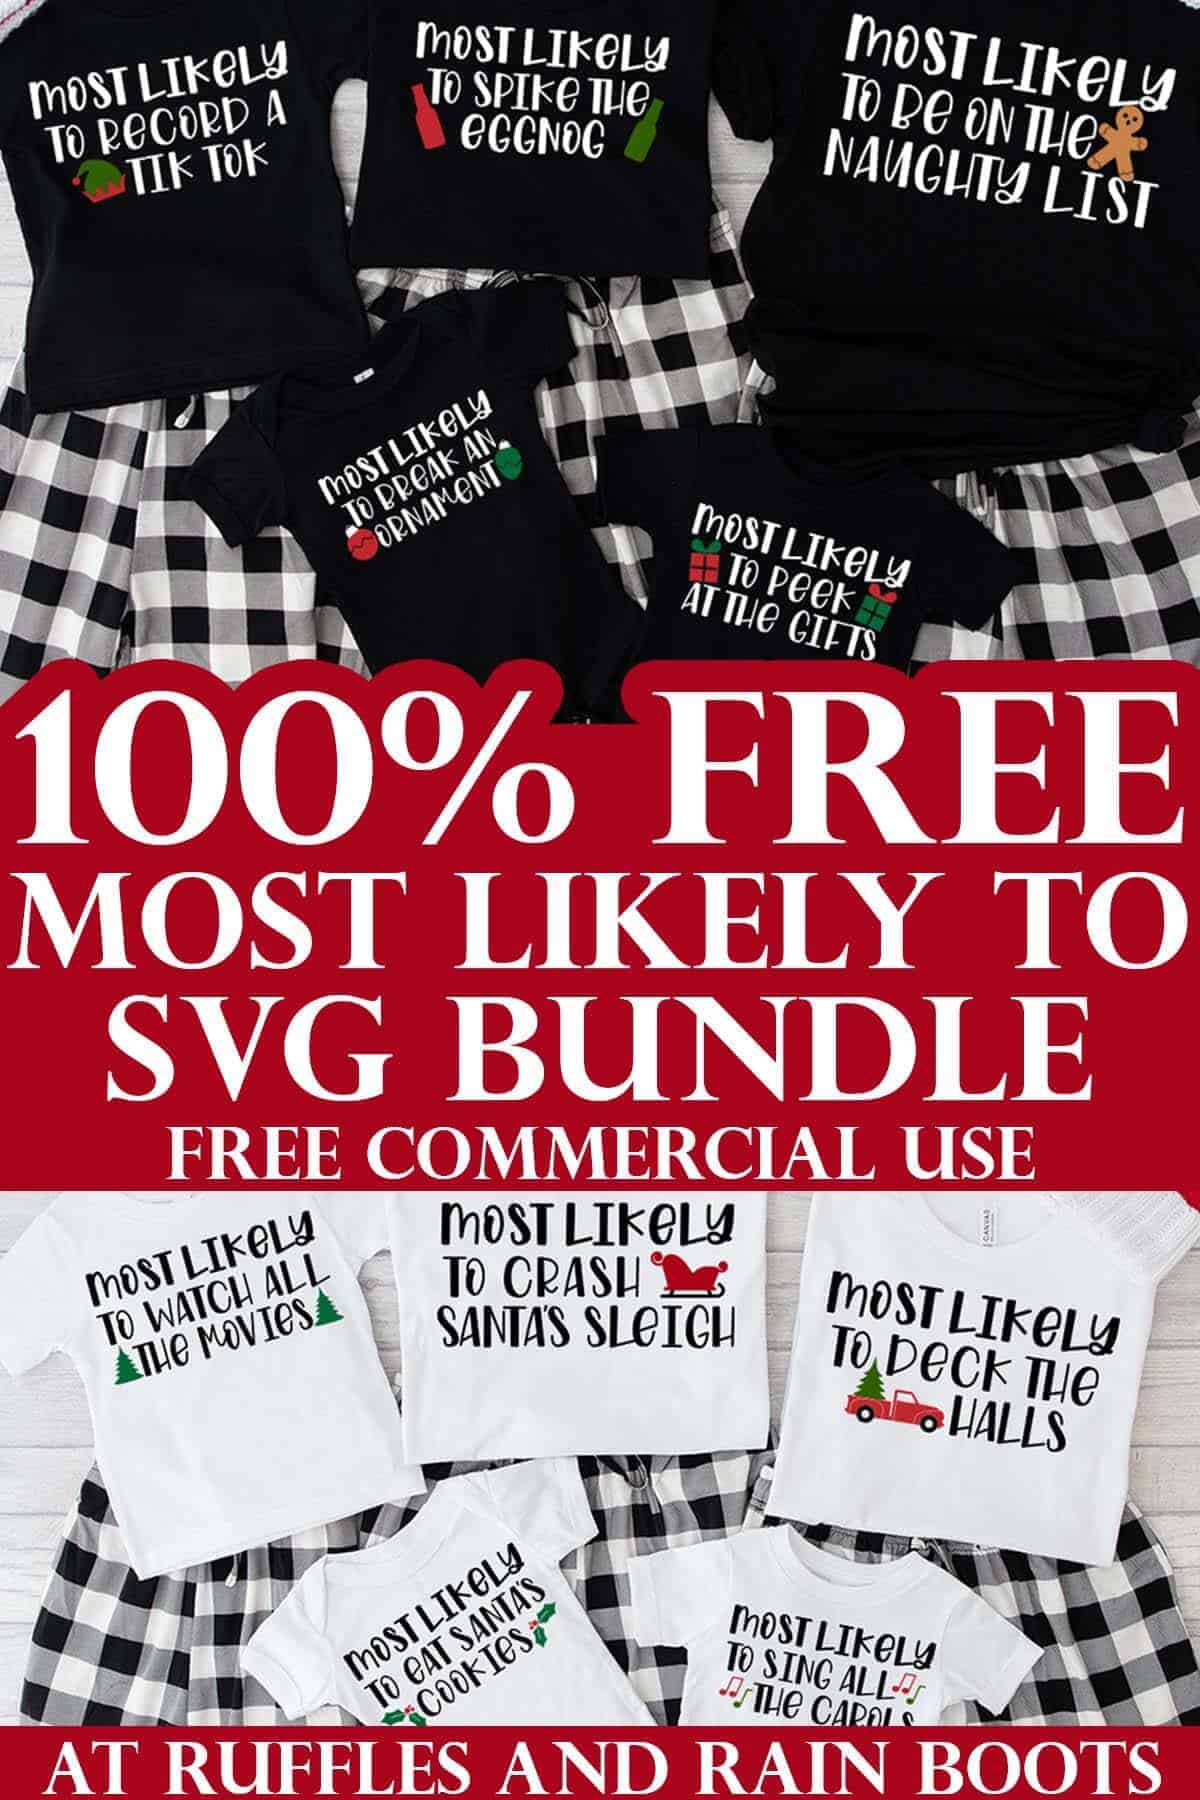 Vertical image showing two sets of matching Christmas shirts made with free SVG bundle.